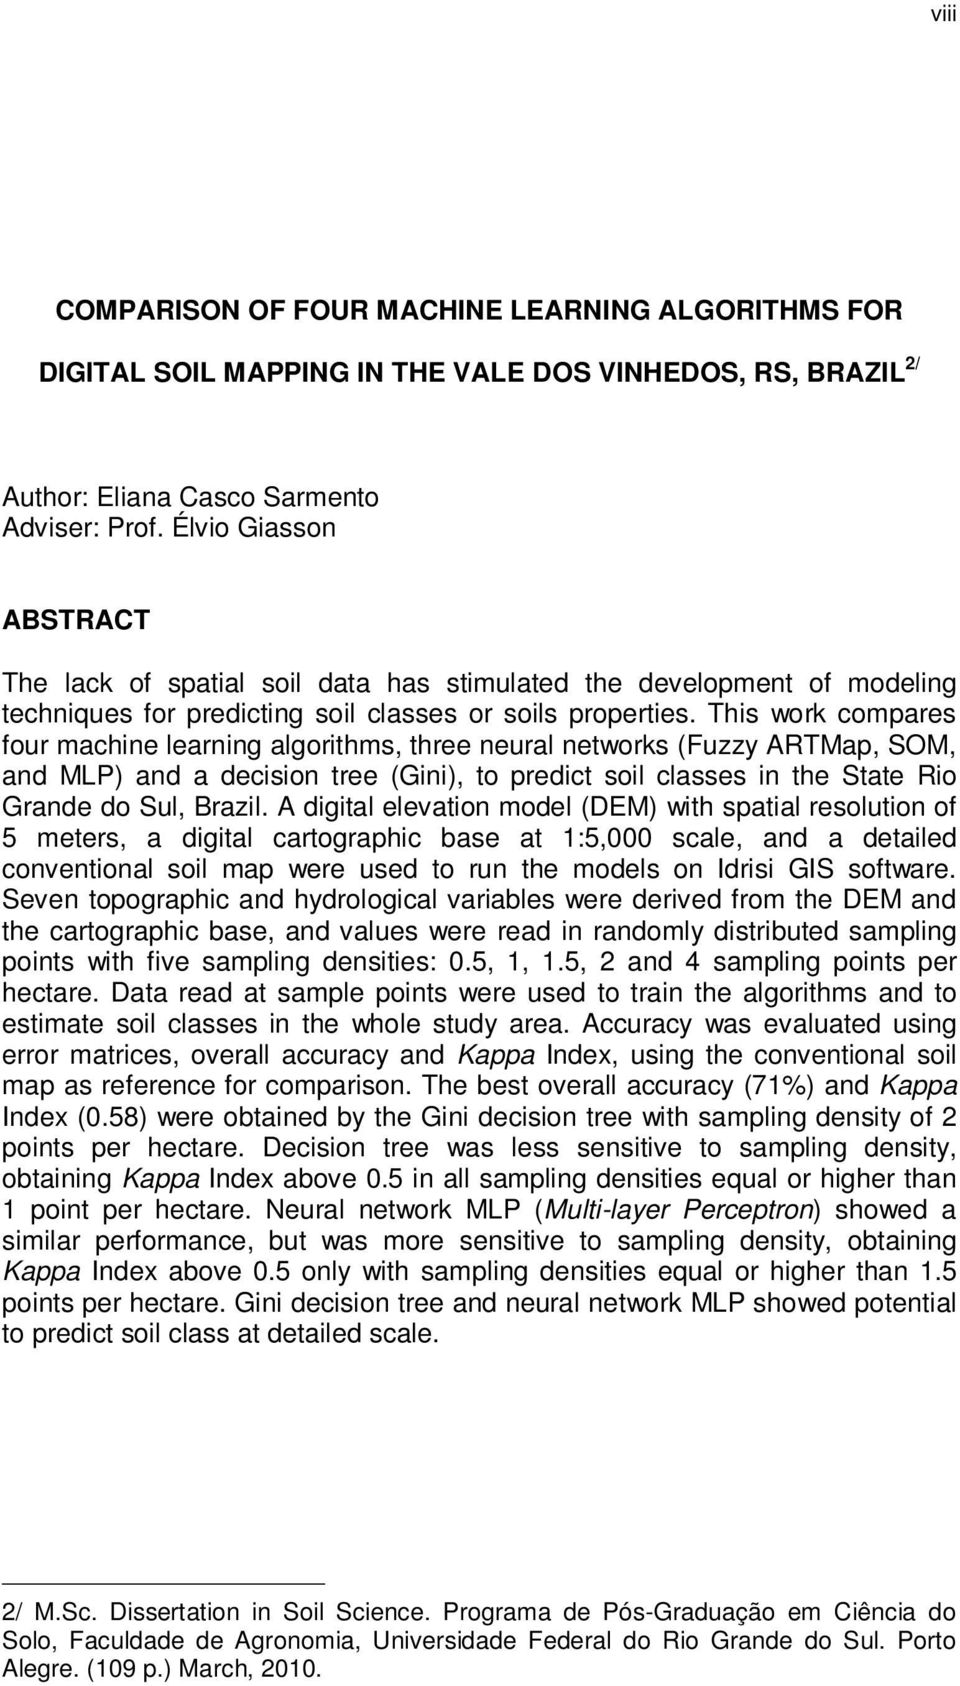 This work compares four machine learning algorithms, three neural networks (Fuzzy ARTMap, SOM, and MLP) and a decision tree (Gini), to predict soil classes in the State Rio Grande do Sul, Brazil.